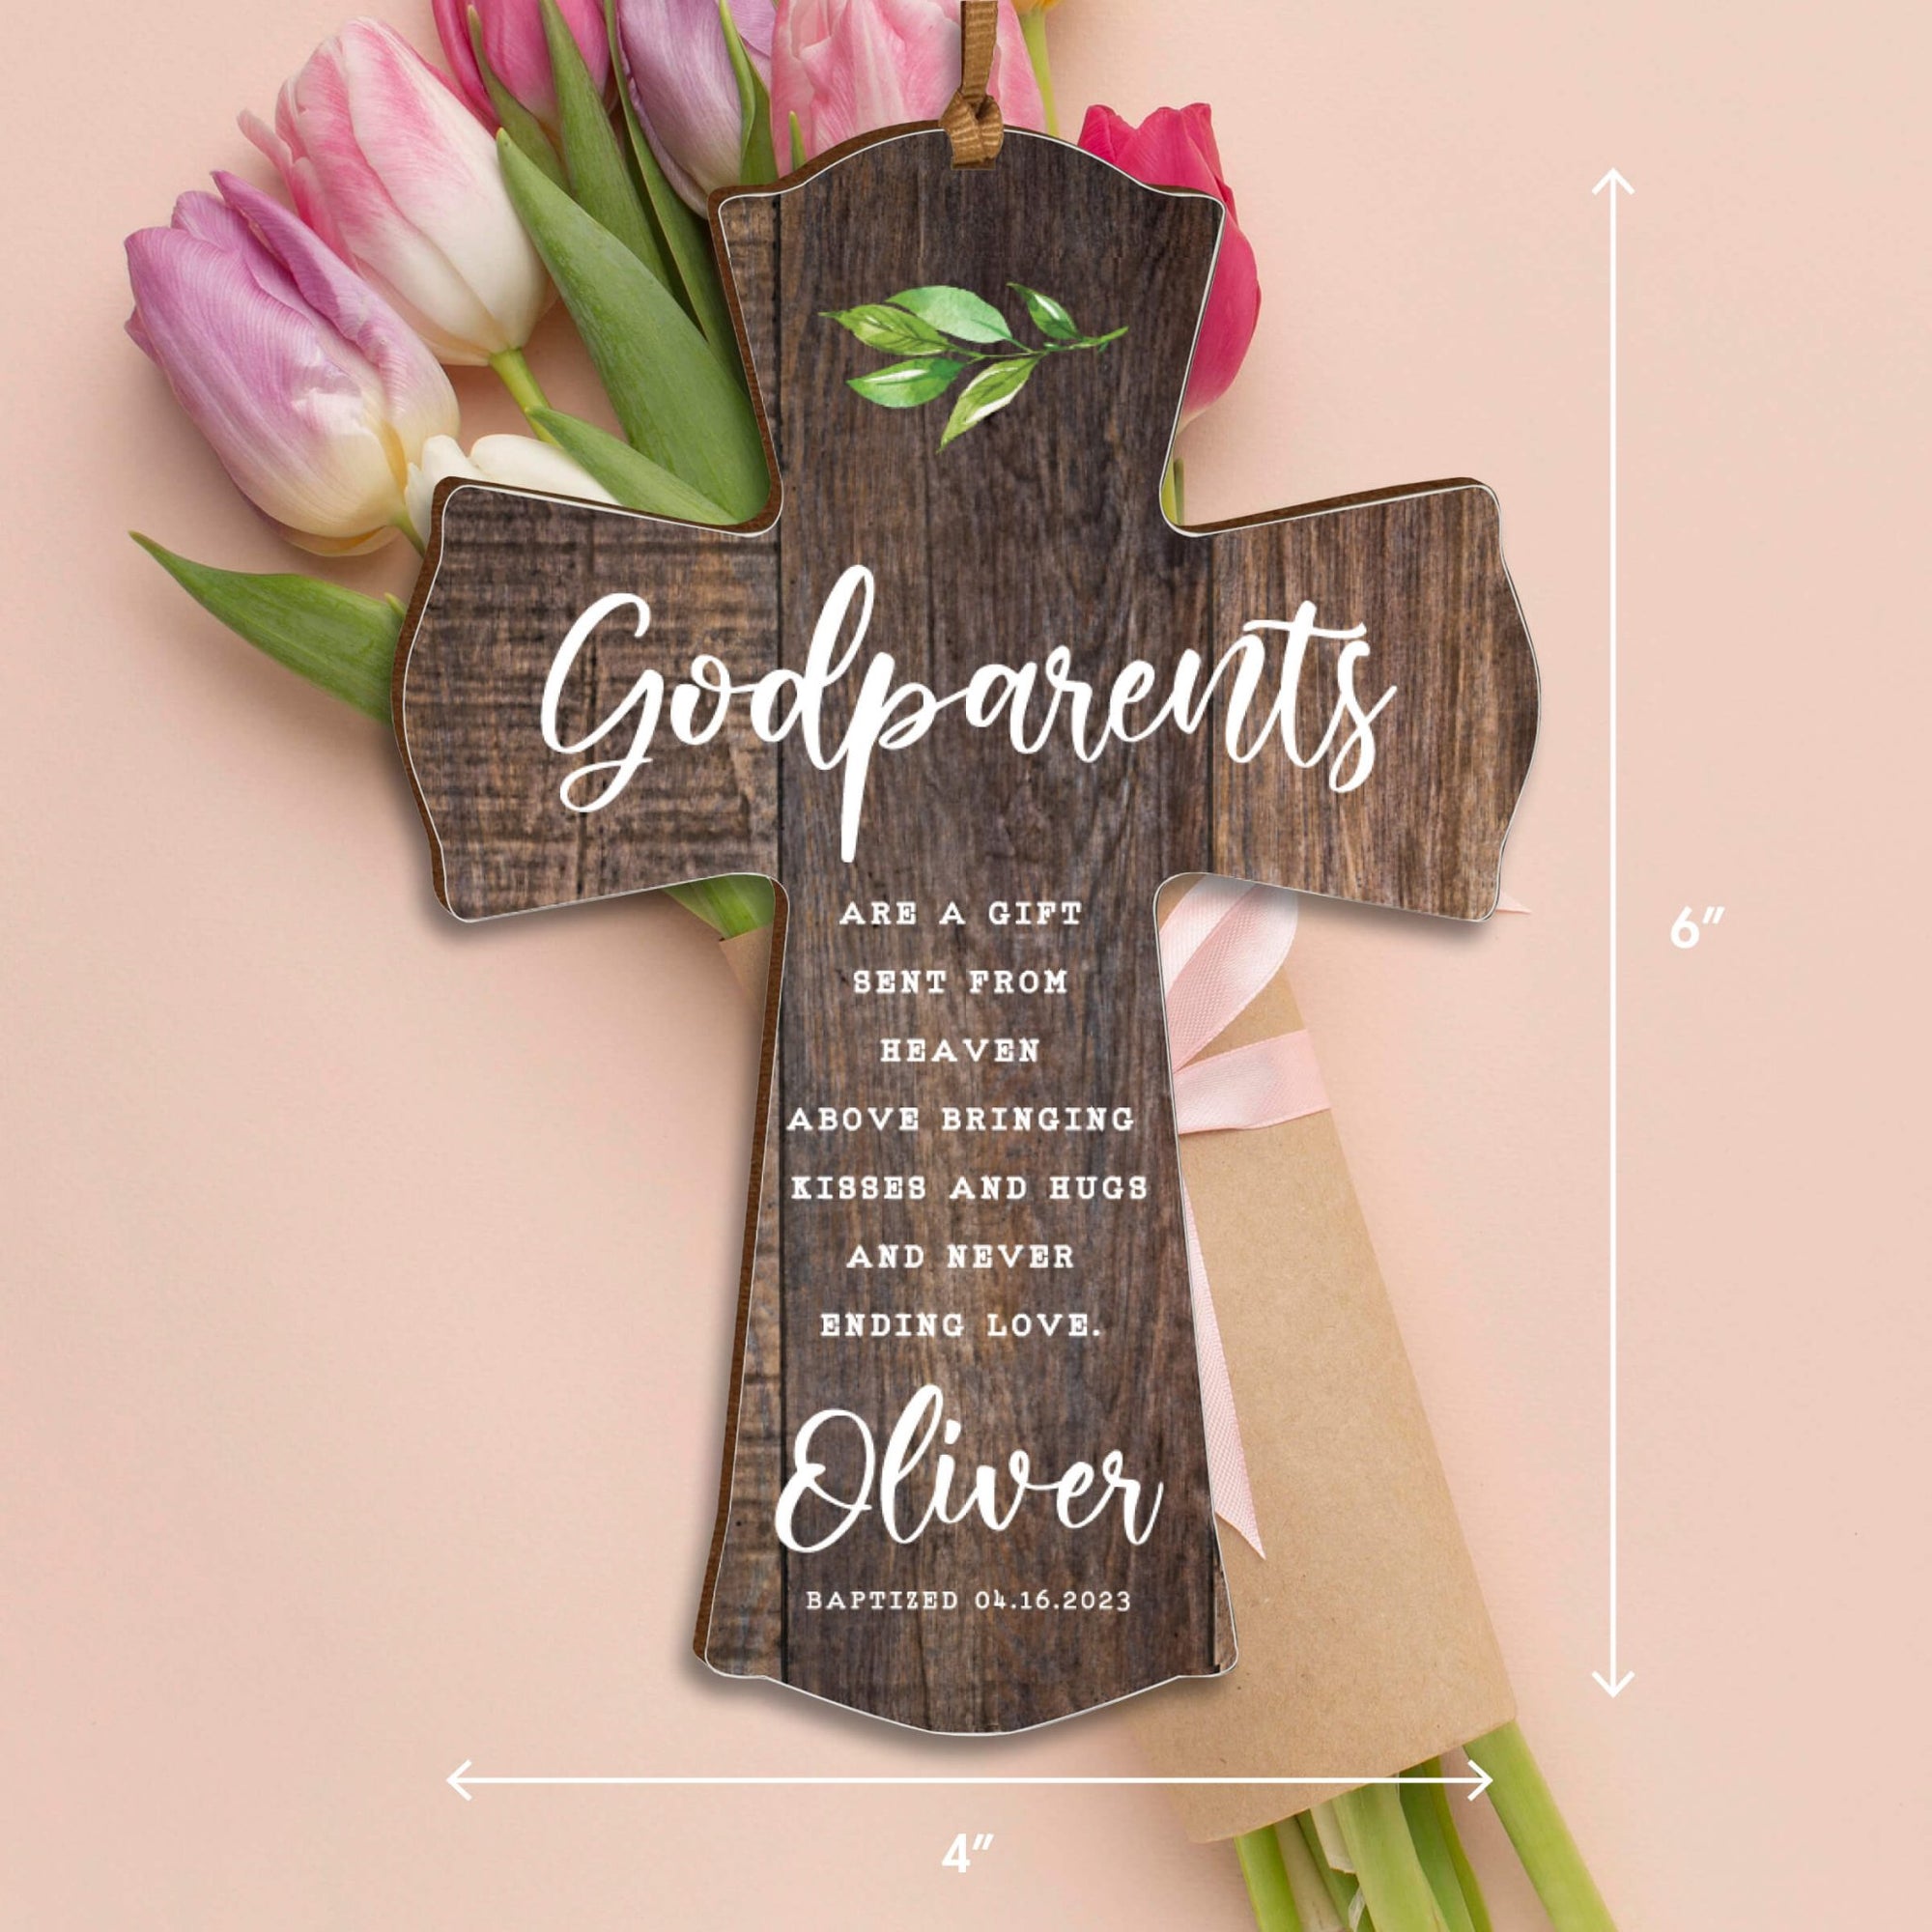 Personalized Wooden Hanging Mini Cross for Godparents - LifeSong Milestones